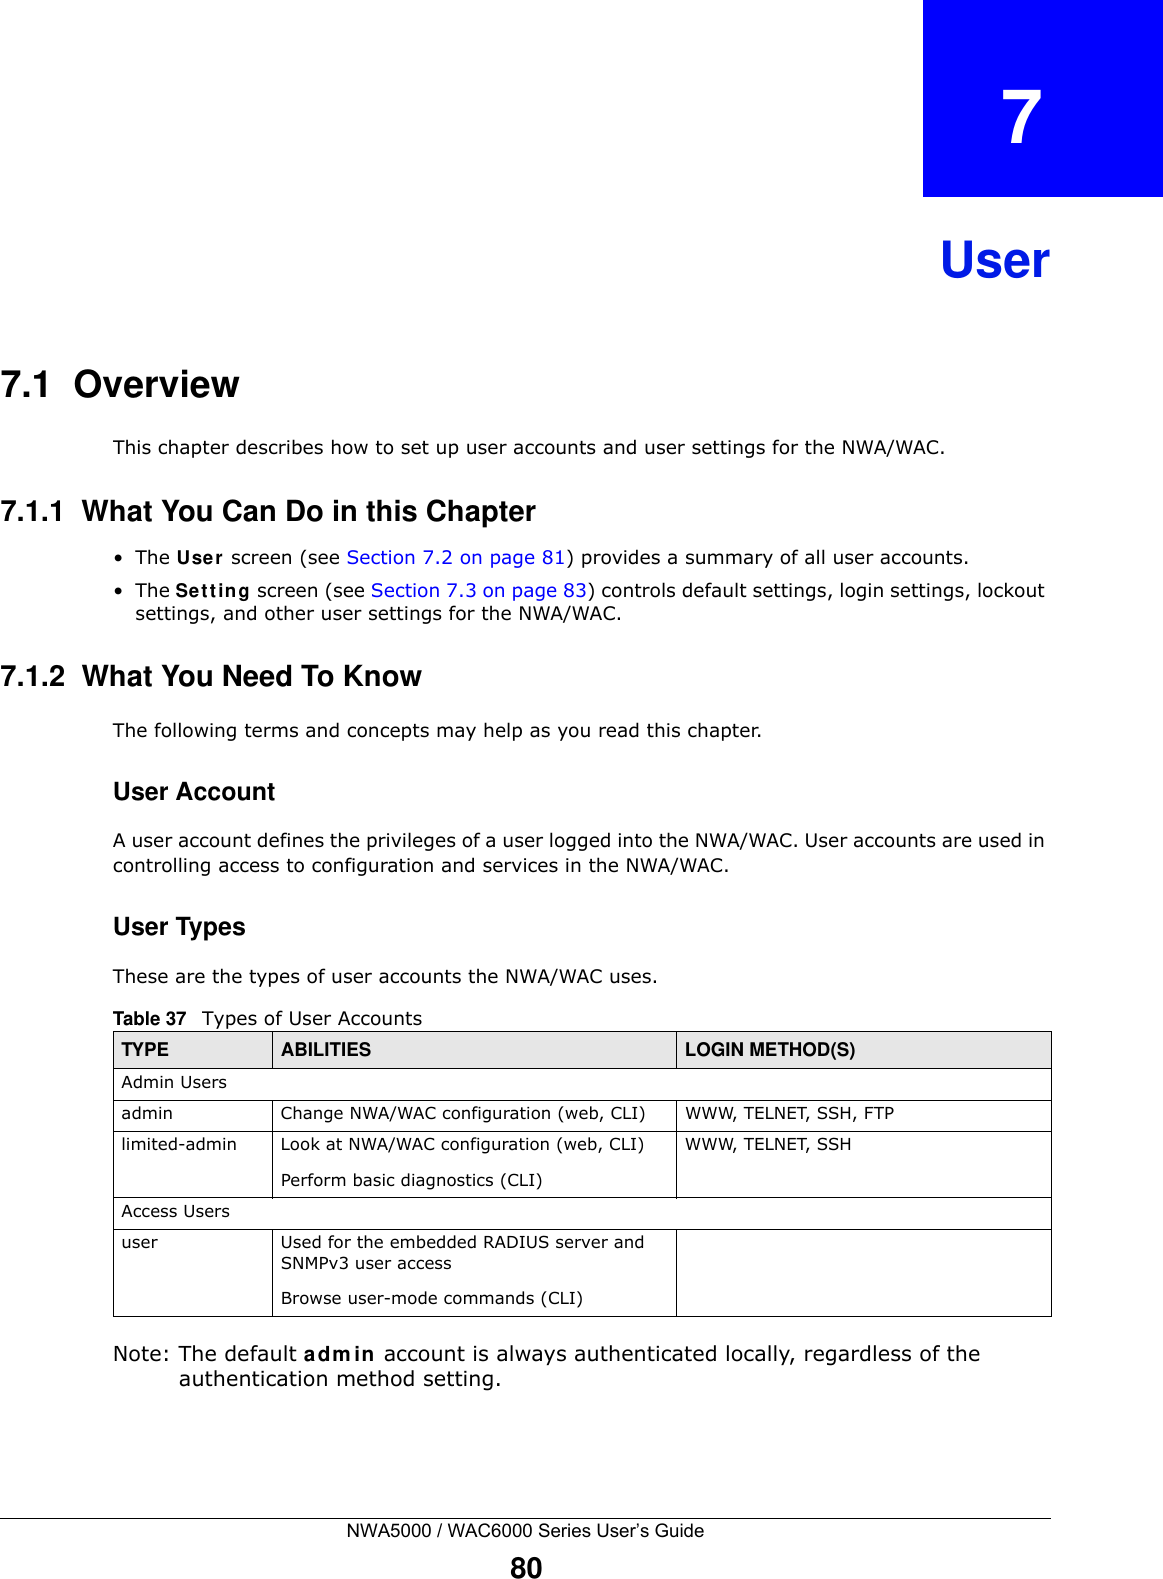 NWA5000 / WAC6000 Series User’s Guide80CHAPTER   7User7.1  OverviewThis chapter describes how to set up user accounts and user settings for the NWA/WAC. 7.1.1  What You Can Do in this Chapter•The Use r screen (see Section 7.2 on page 81) provides a summary of all user accounts.•The Se tt ing screen (see Section 7.3 on page 83) controls default settings, login settings, lockout settings, and other user settings for the NWA/WAC. 7.1.2  What You Need To KnowThe following terms and concepts may help as you read this chapter.User AccountA user account defines the privileges of a user logged into the NWA/WAC. User accounts are used in controlling access to configuration and services in the NWA/WAC.User TypesThese are the types of user accounts the NWA/WAC uses.  Note: The default adm in account is always authenticated locally, regardless of the authentication method setting.Table 37   Types of User AccountsTYPE ABILITIES LOGIN METHOD(S)Admin Usersadmin Change NWA/WAC configuration (web, CLI) WWW, TELNET, SSH, FTPlimited-admin Look at NWA/WAC configuration (web, CLI)Perform basic diagnostics (CLI)WWW, TELNET, SSHAccess Usersuser Used for the embedded RADIUS server and SNMPv3 user accessBrowse user-mode commands (CLI)